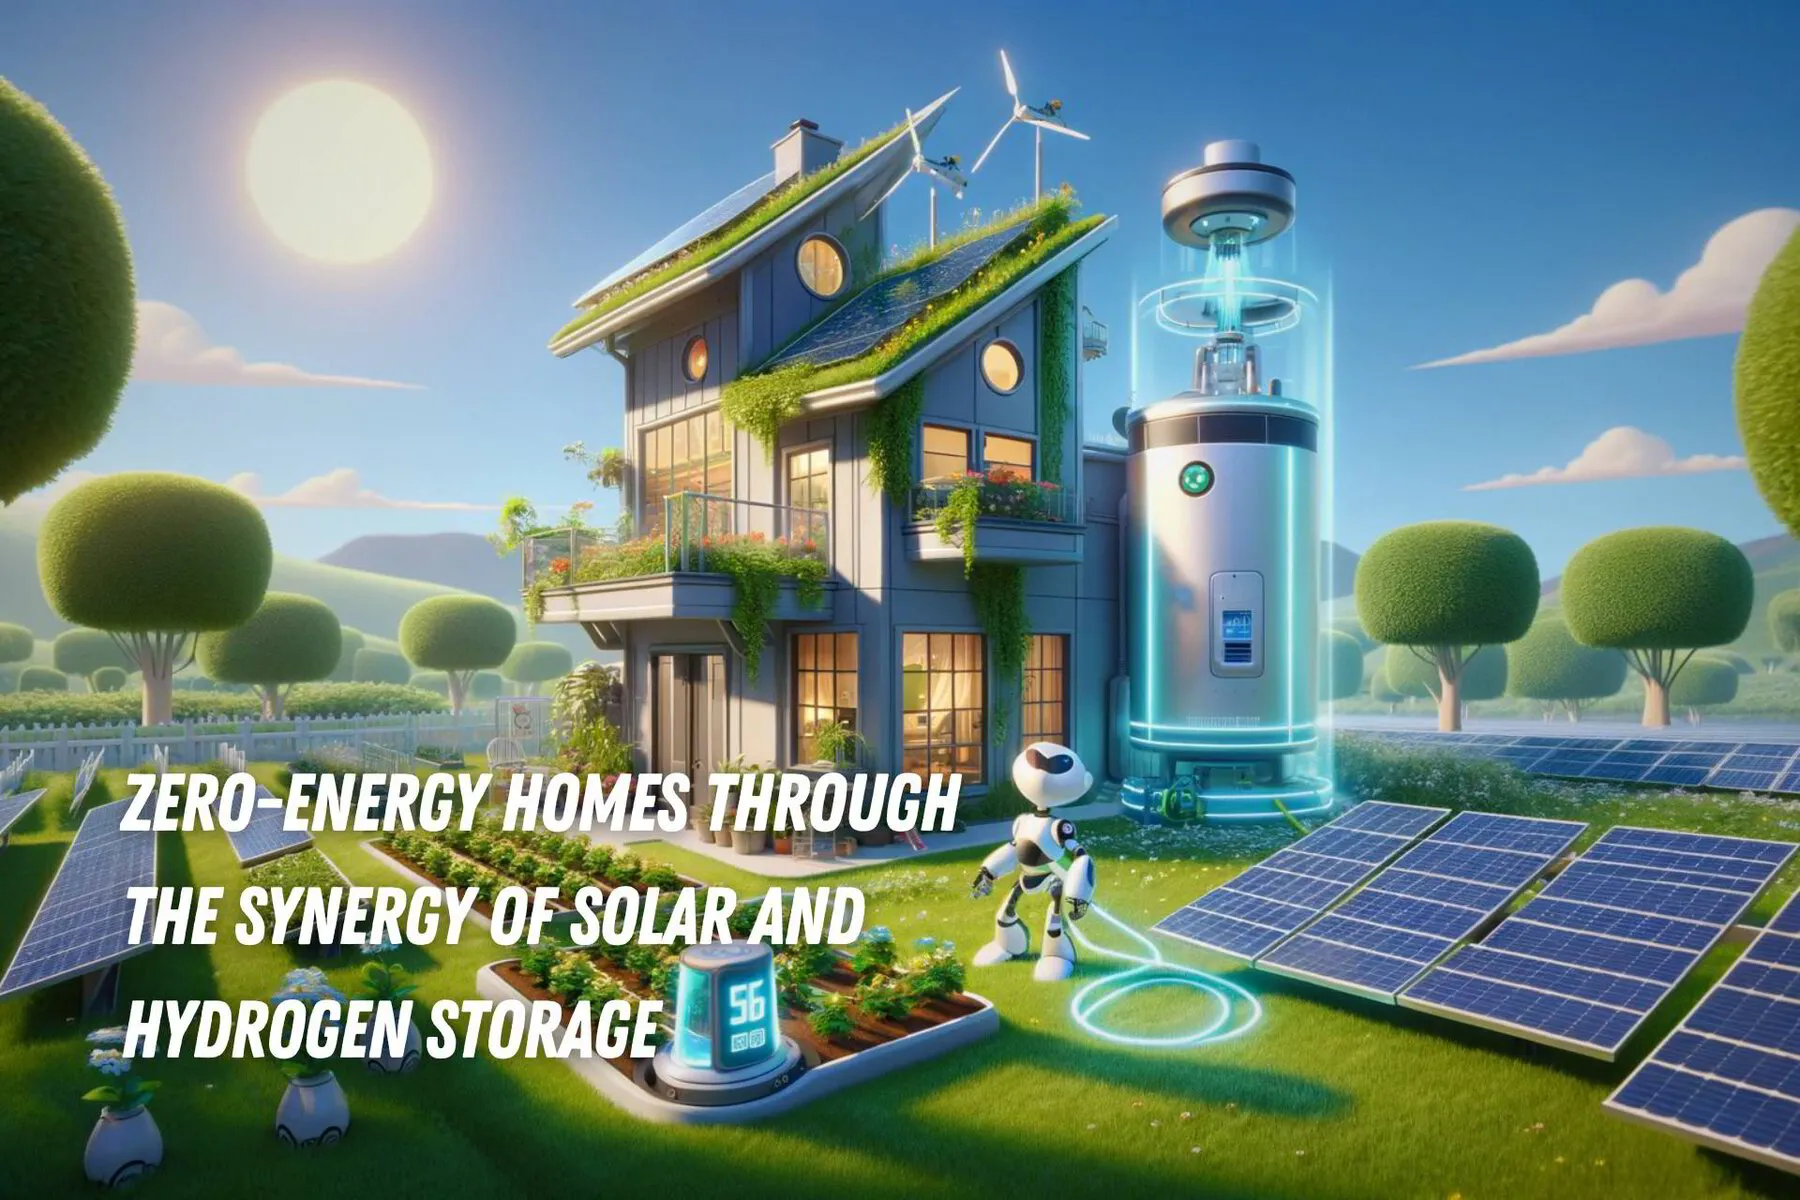 Empowering the Future: Zero-Energy Homes Through the Synergy of Photovoltaics and Hydrogen Storage